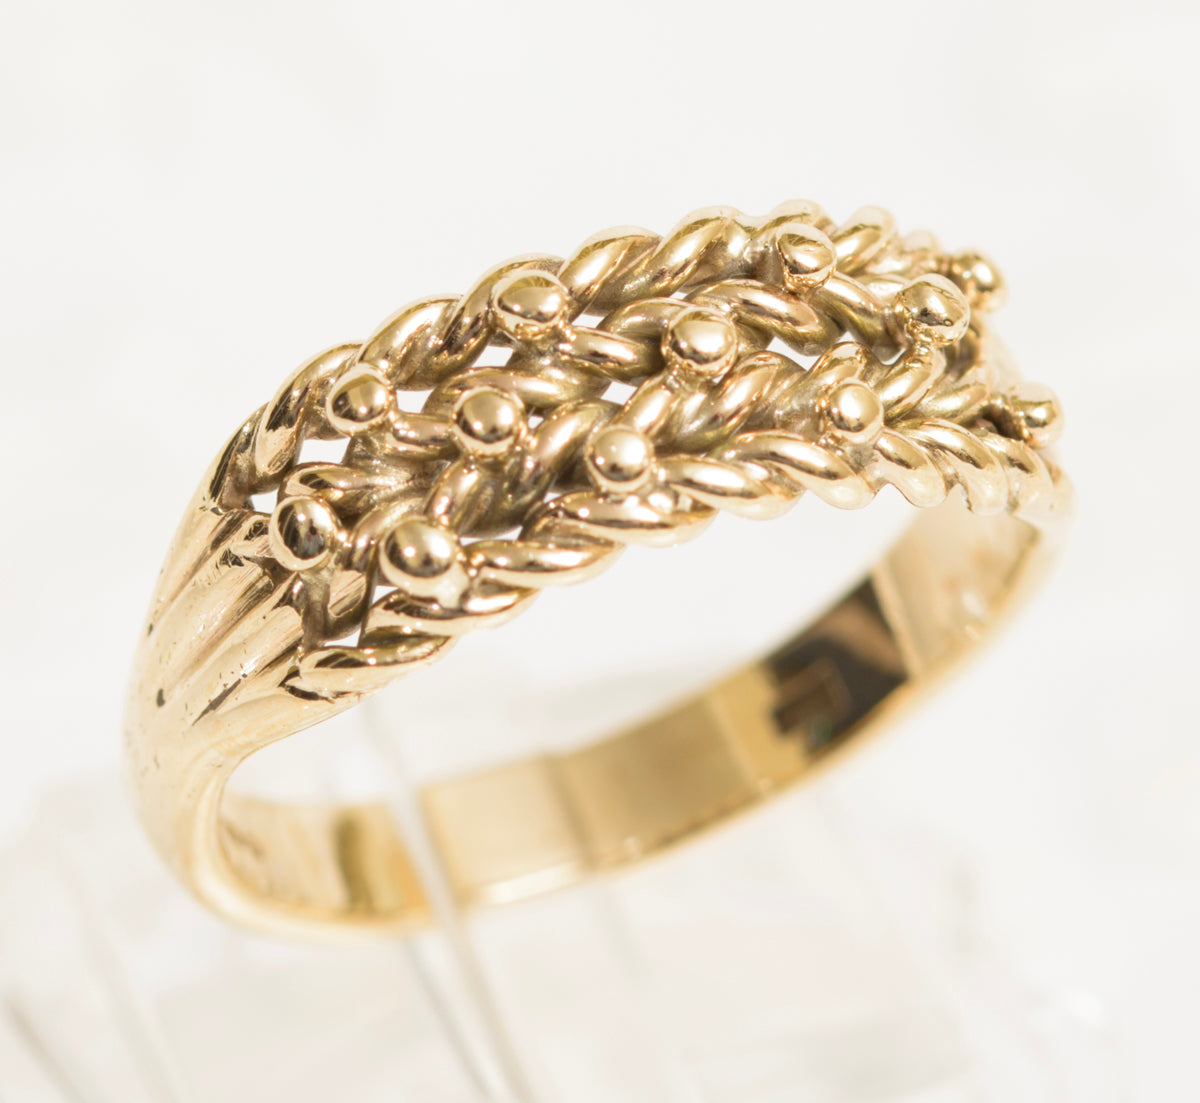 Vintage 9ct Yellow Gold Keeper Ring Unisex Design Size P1/2 (7.75) (A1970)